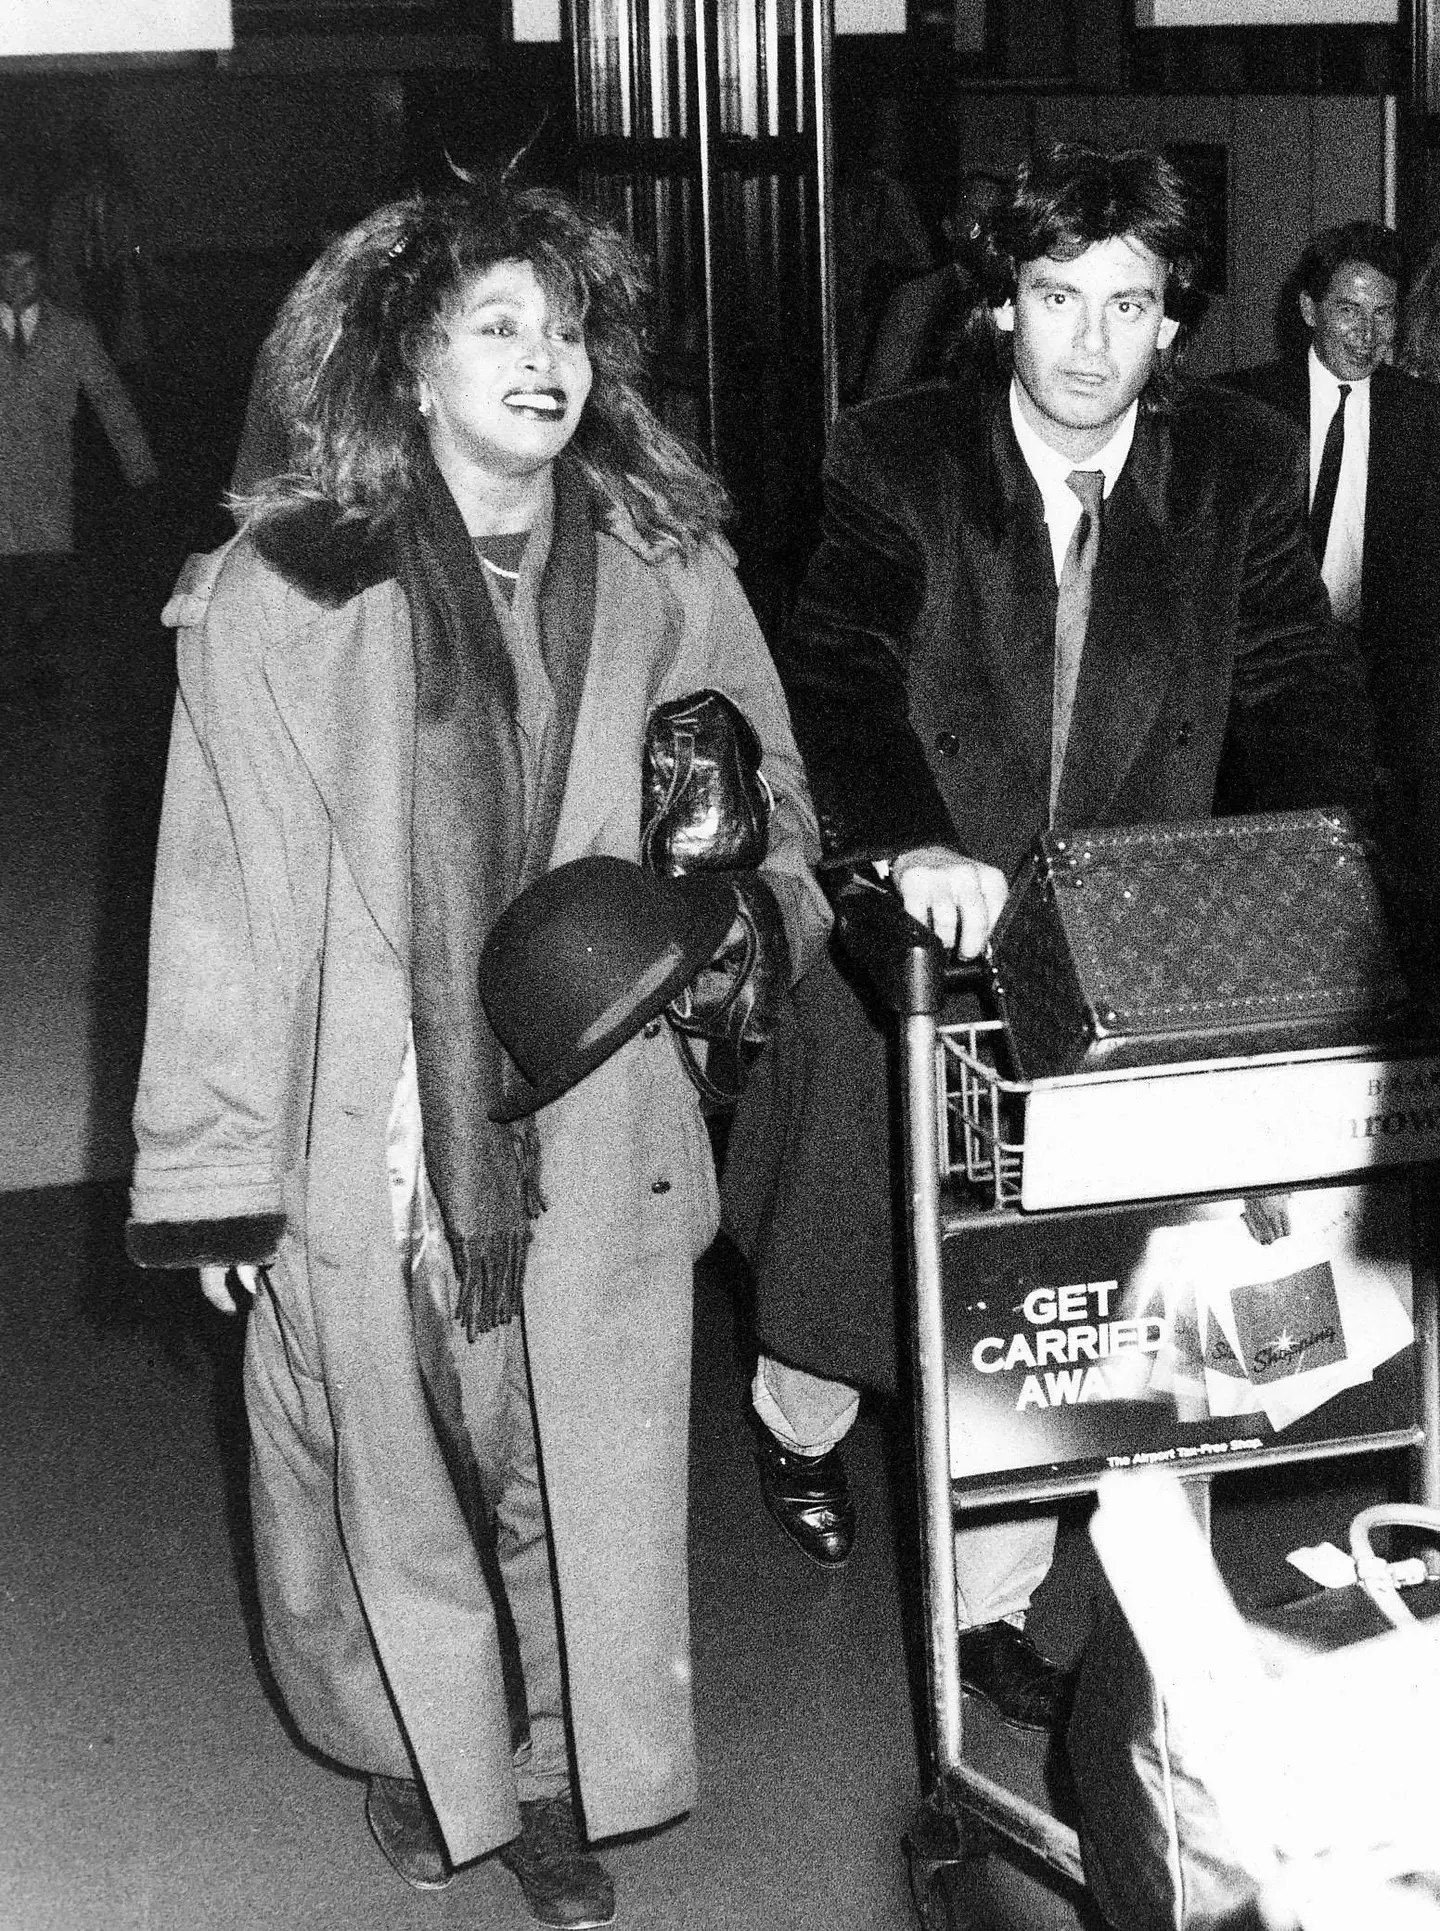 The couple met in 1985, while Tina was on tour.